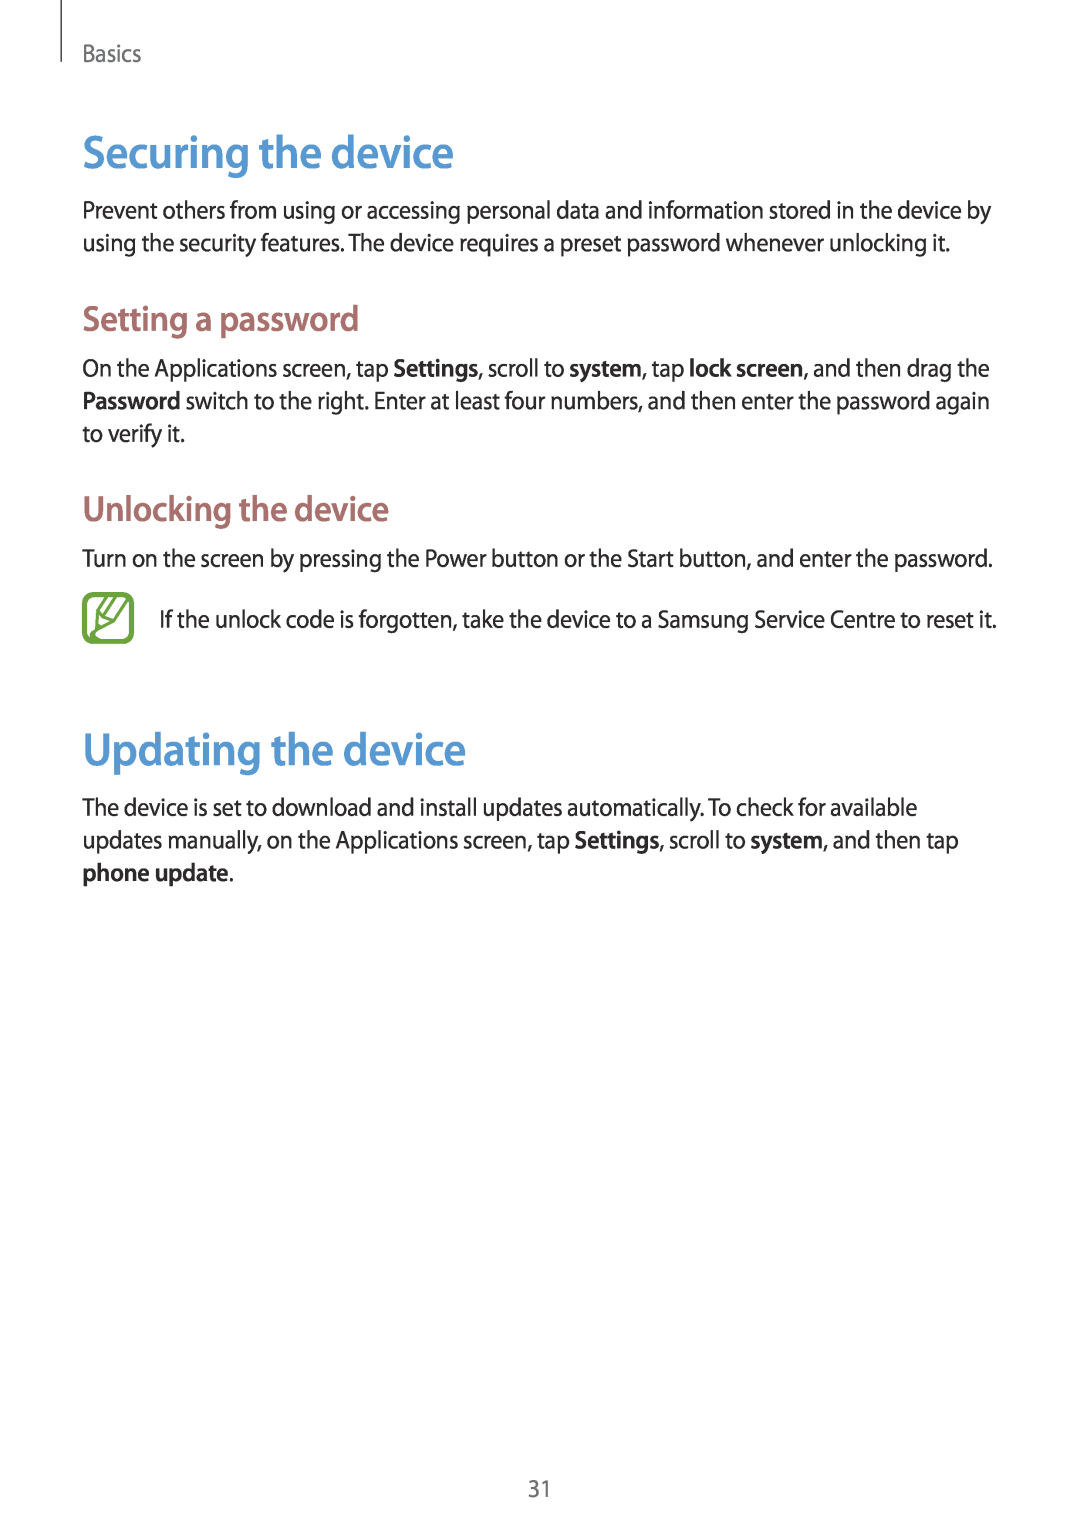 Samsung GT-I8750ALAETL manual Securing the device, Updating the device, Setting a password, Unlocking the device, Basics 